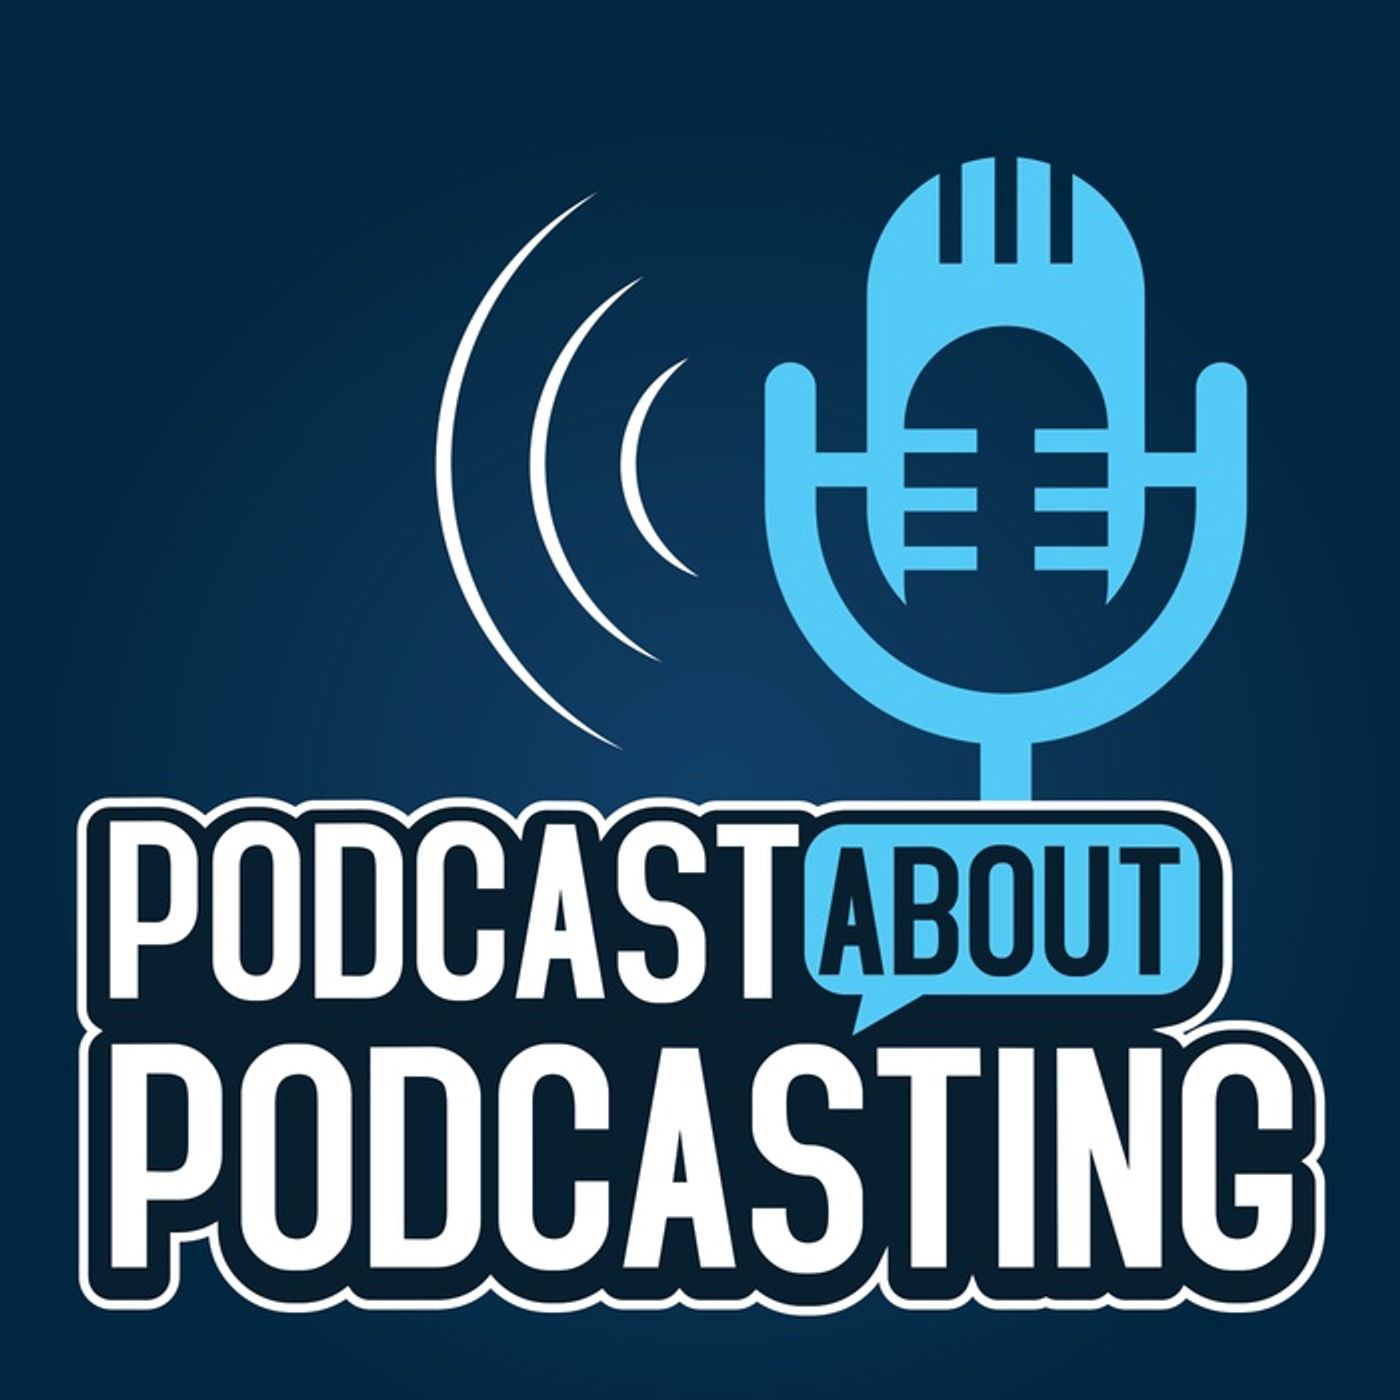 Hosting a Podcast from your own Server?